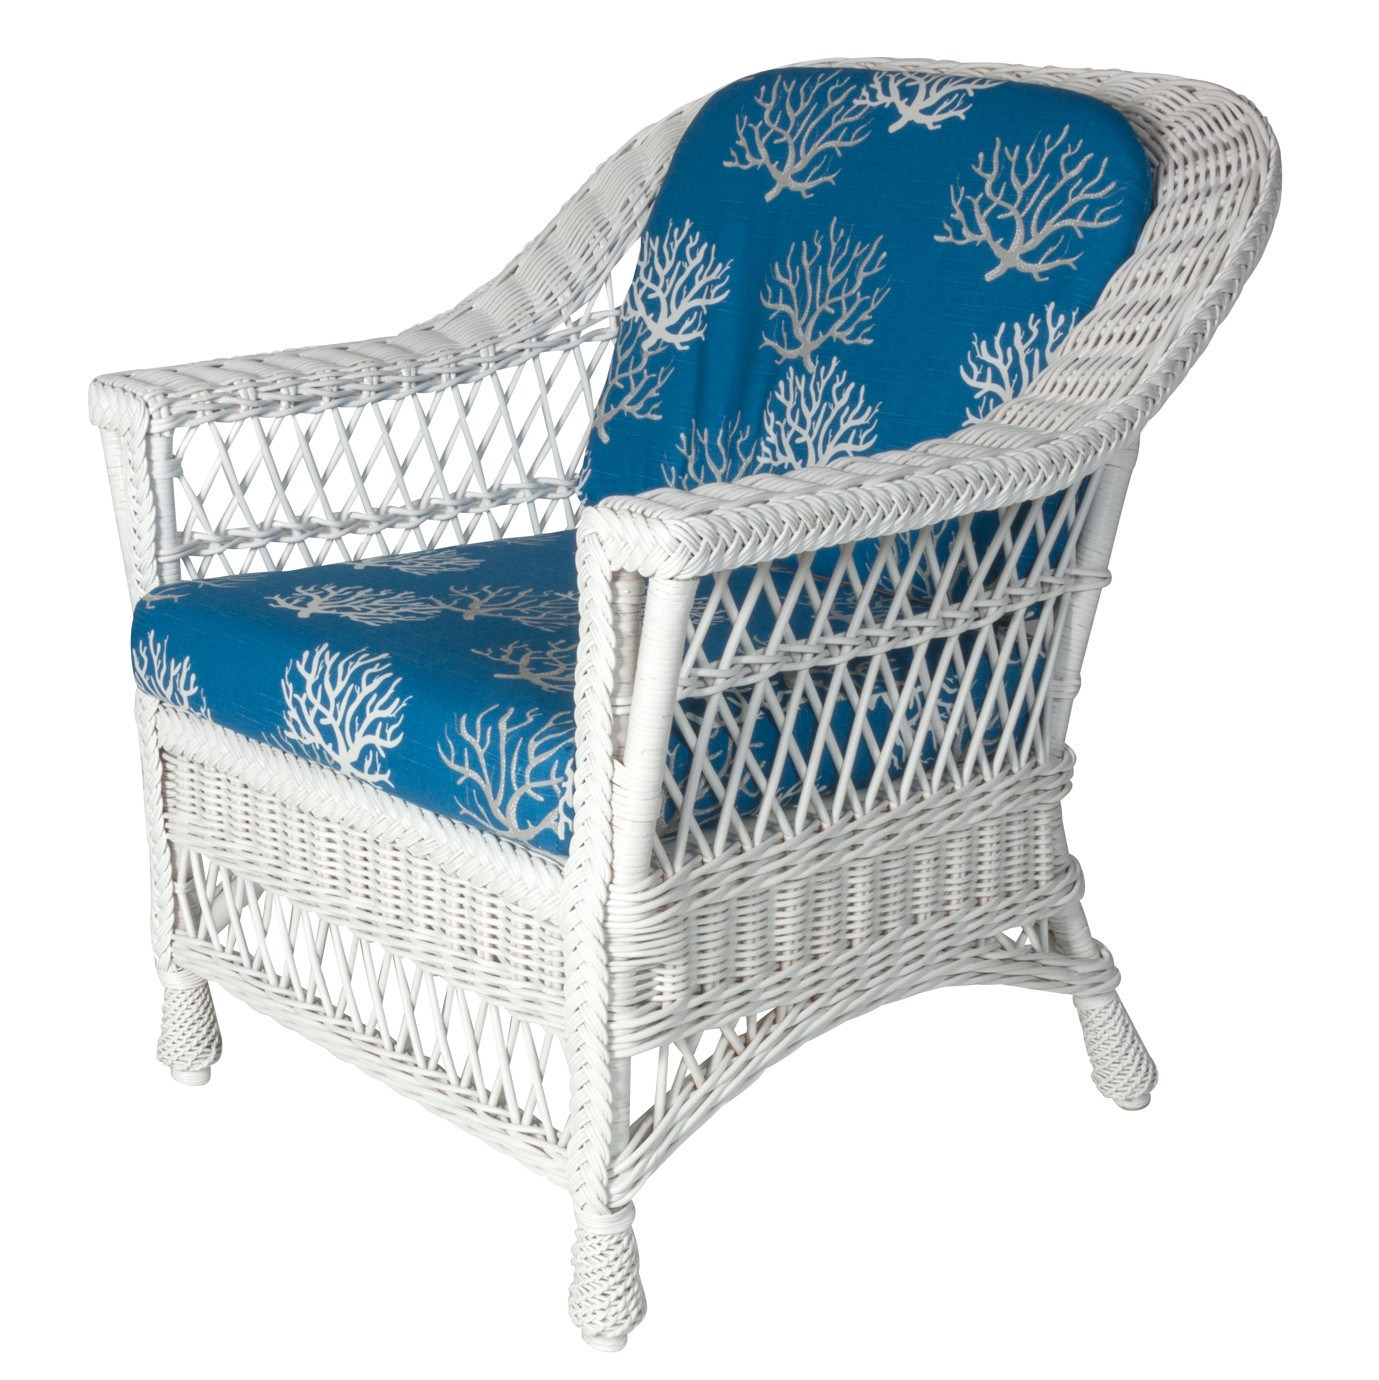 Designer Wicker & Rattan By Tribor Harbor front Arm Chair by Designer Wicker from Tribor Chair - Rattan Imports